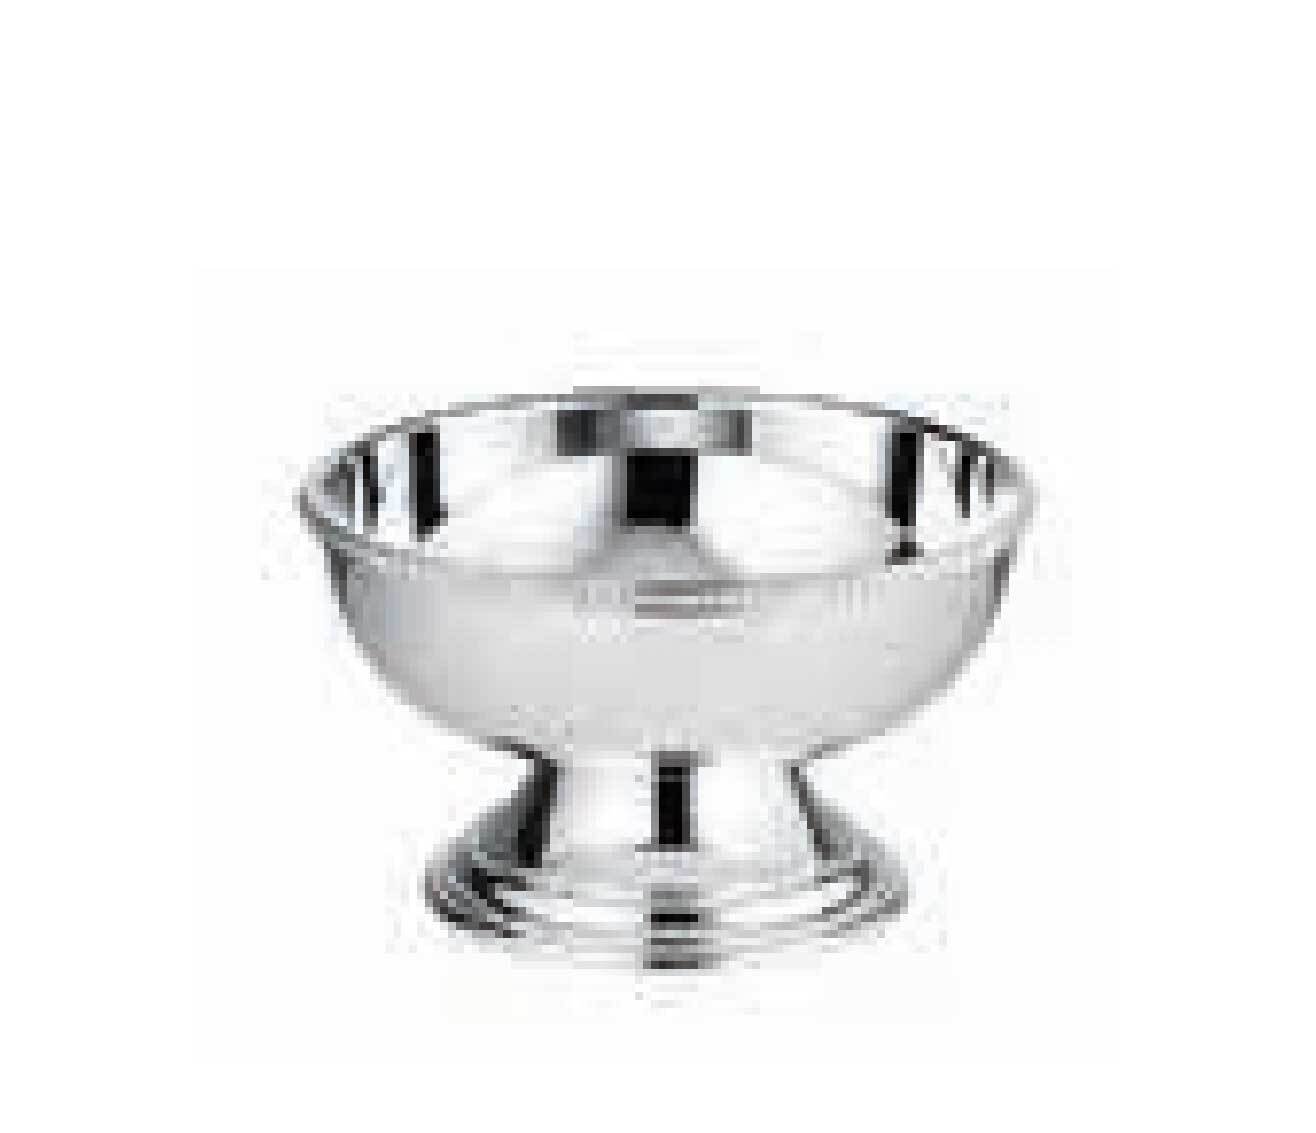 Ercuis Lauriers Cup With Foot 3.125 Inch Silver Plated F51L280-13